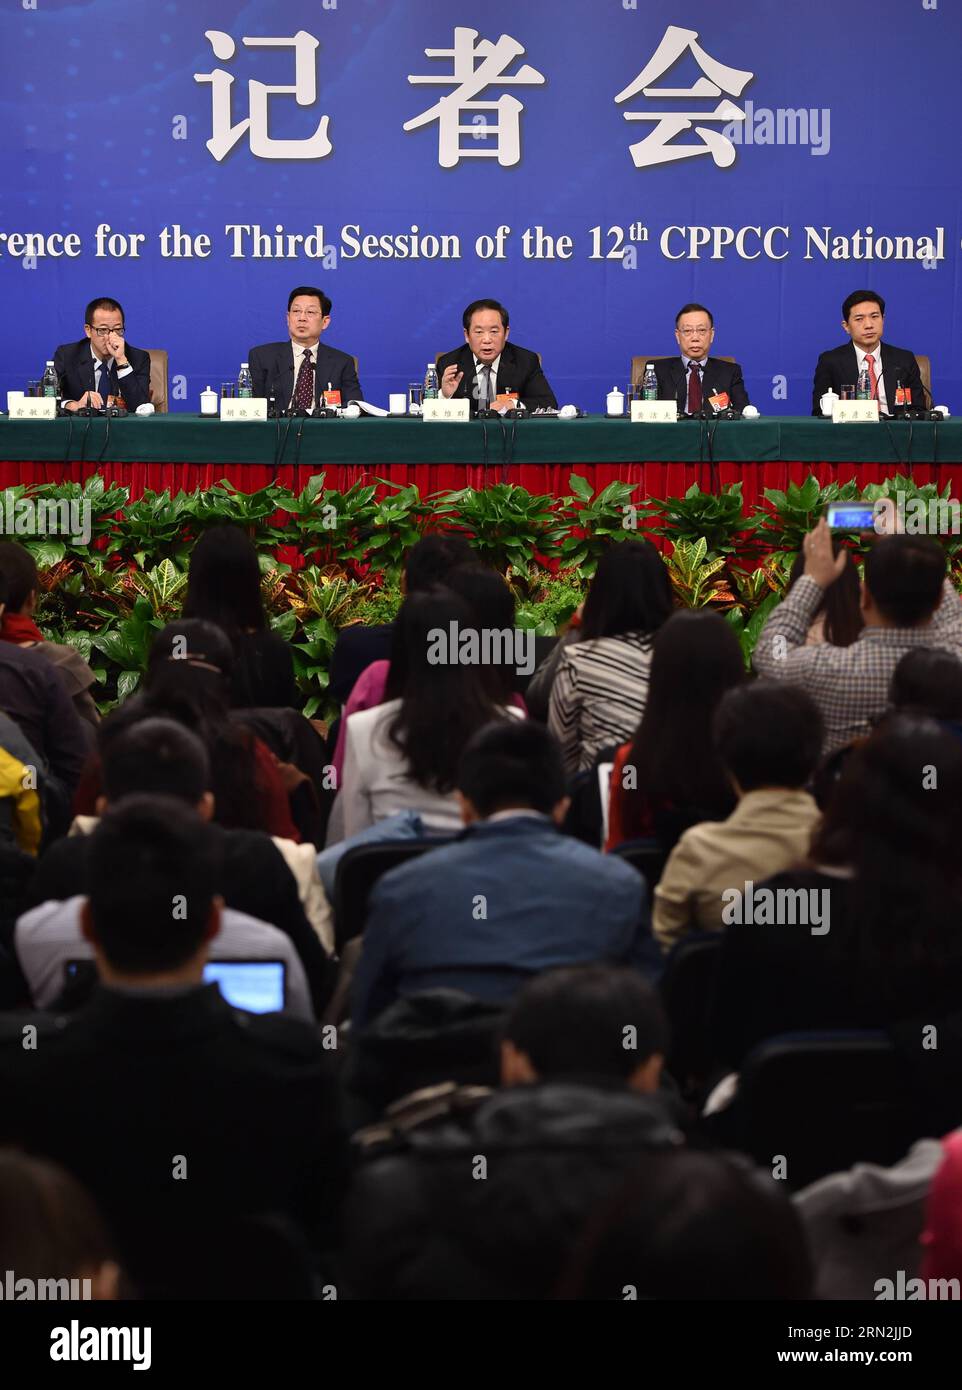 (150311) -- BEIJING, March 11, 2015 -- Zhu Weiqun(C), Huang Jiefu(2nd R), Hu Xiaoyi(2nd L), Li Yanhong(1st R), Yu Minhong(1st L), members of the 12th National Committee of the Chinese People s Political Consultative Conference (CPPCC), give a press conference during the third session of the 12th CPPCC National Committee in Beijing, capital of China, March 11, 2015. ) (yxb) (TWO SESSIONS) CHINA-BEIJING-CPPCC-PRESS CONFERENCE (CN) LixXin PUBLICATIONxNOTxINxCHN   Beijing March 11 2015 Zhu  C Huang Jiefu 2nd r HU Xiaoyi 2nd l left  1st r Yu  1st l Members of The 12th National Committee of The Chin Stock Photo